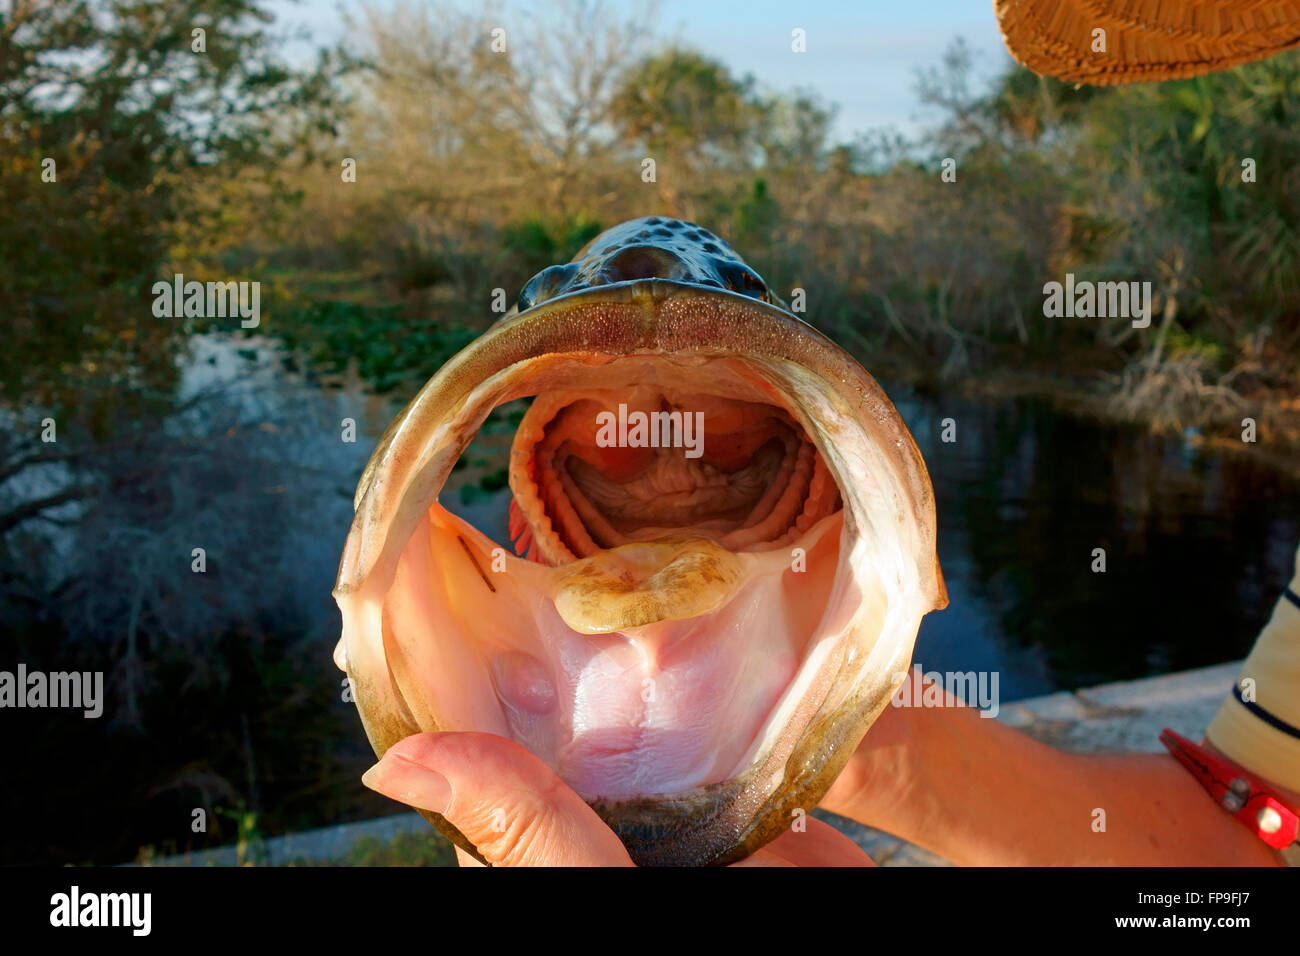 Looking in the mouth and down into the throat of a Largemouth Bass fish showing tongue, gills, etc. Stock Photo